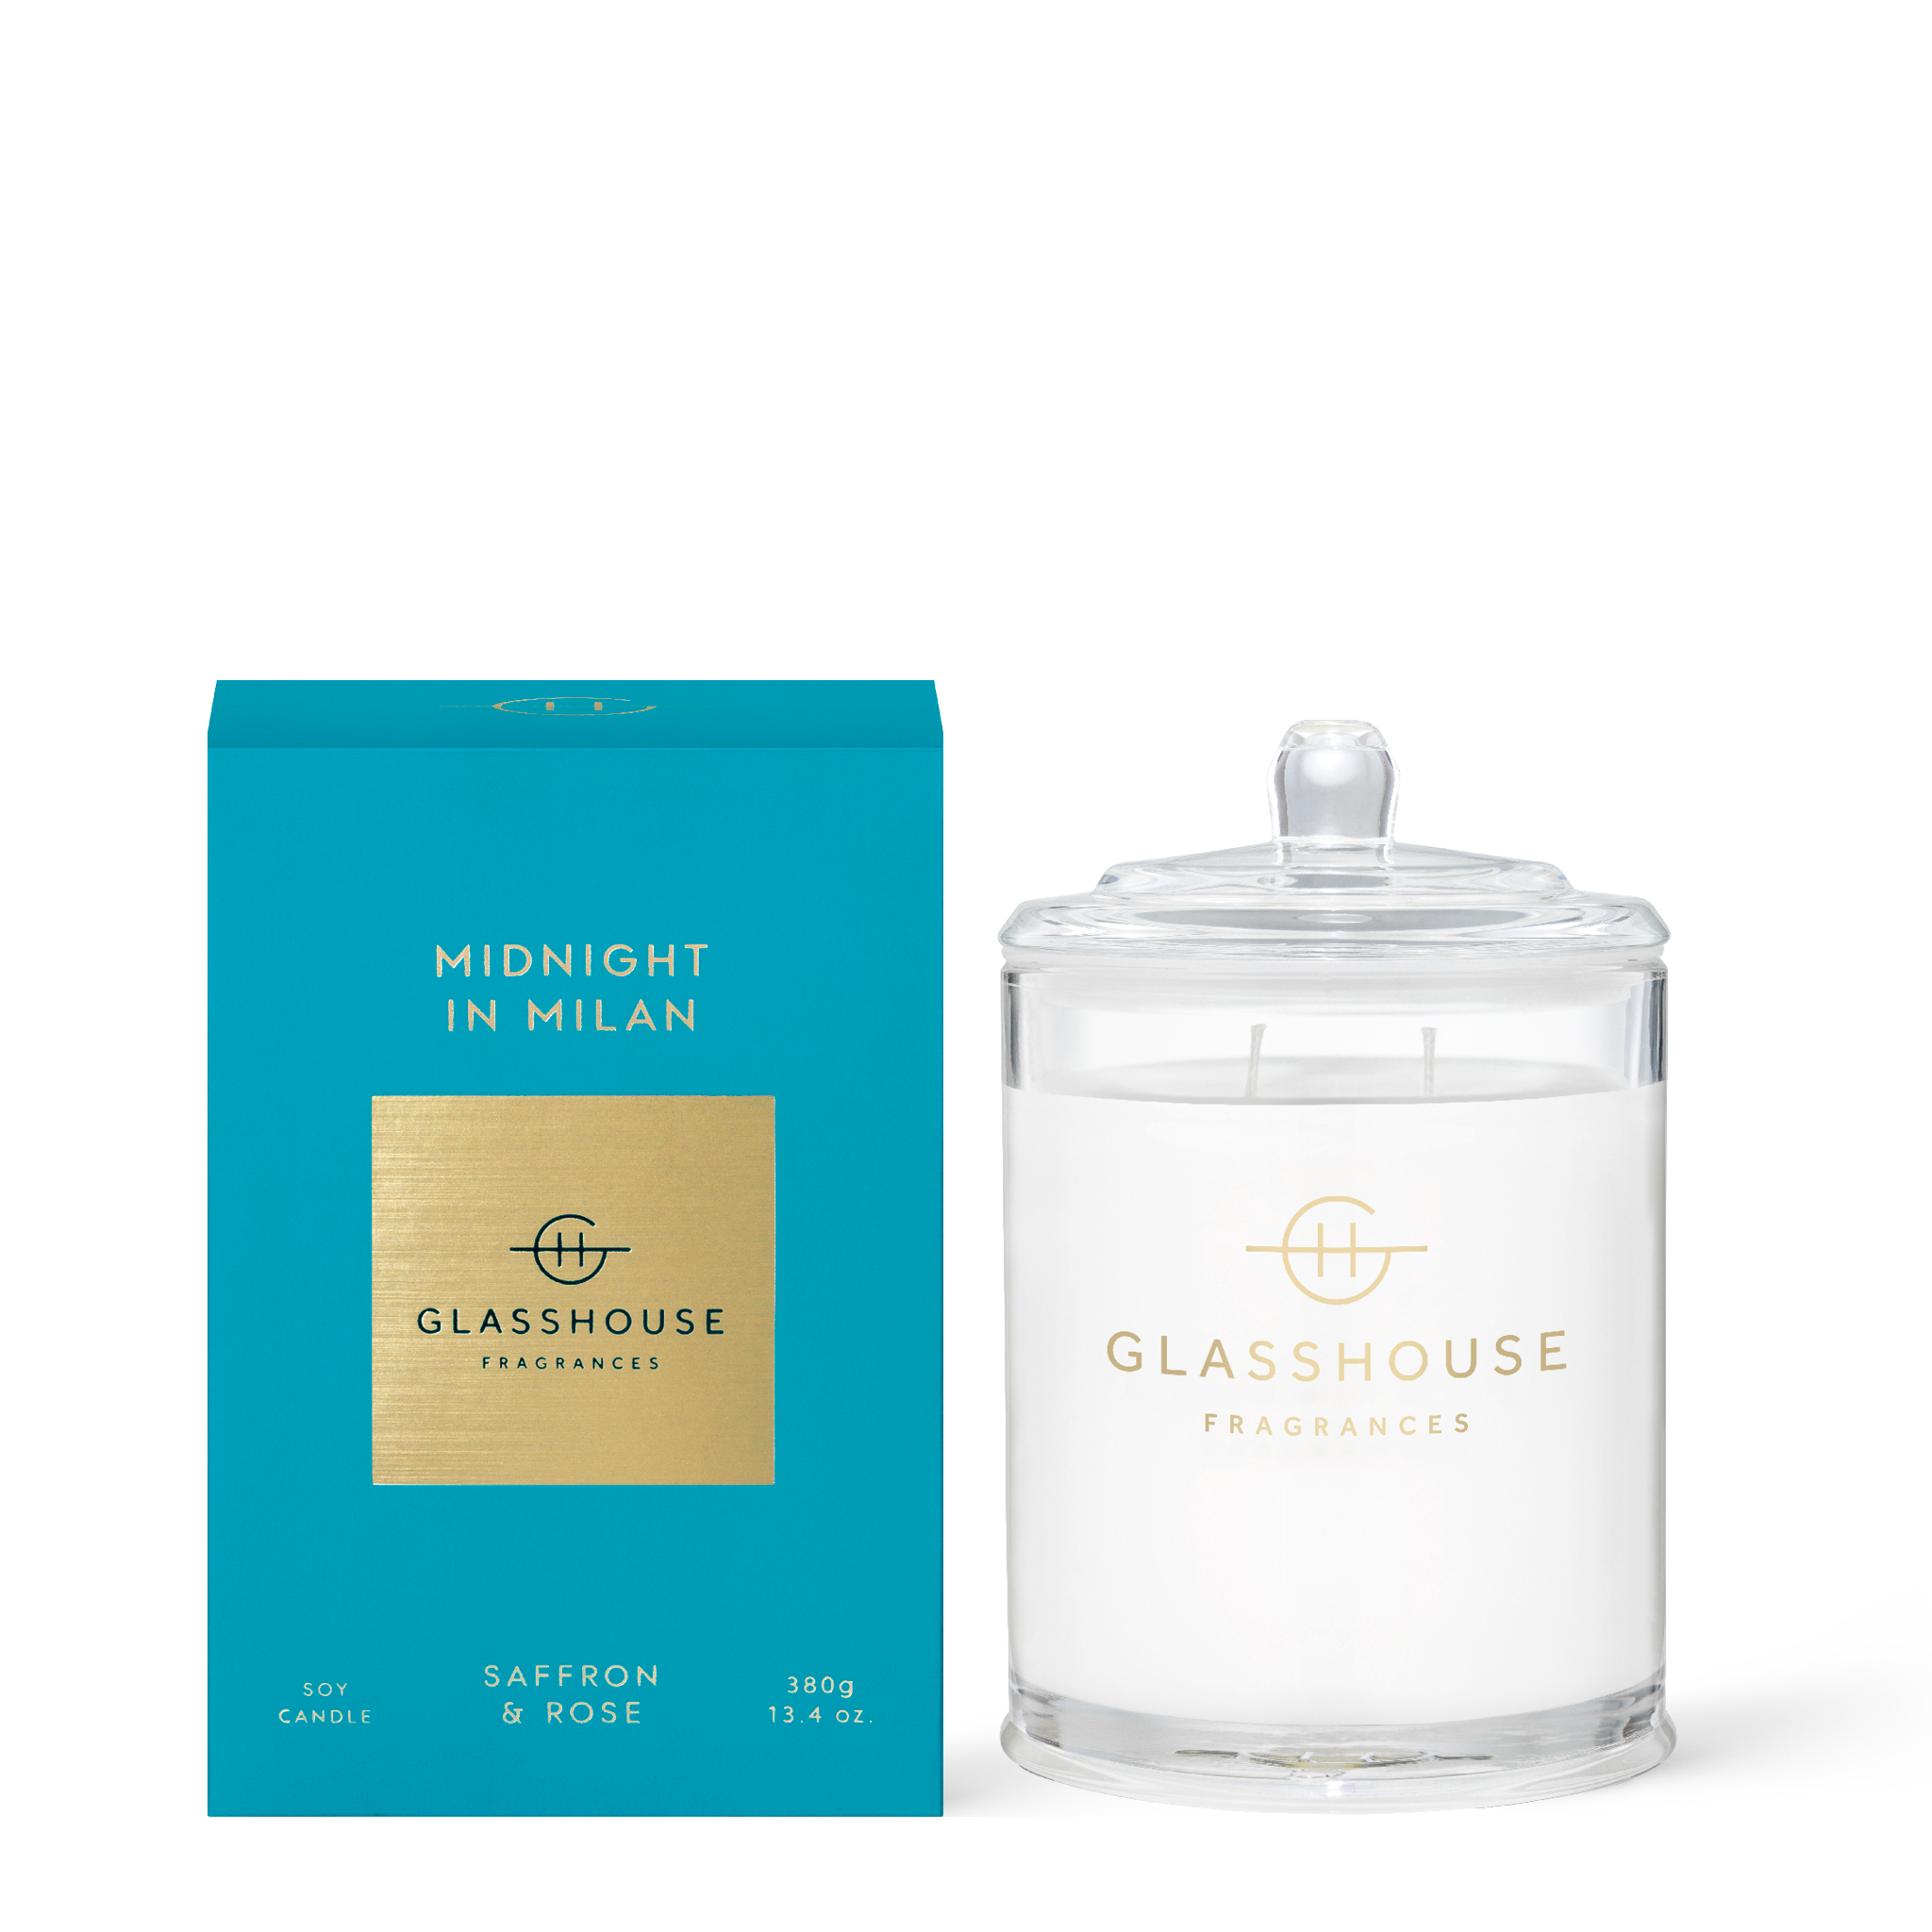 Glasshouse Fragrances Midnight in Milan Saffron and Rose 380g Soy Candle with box